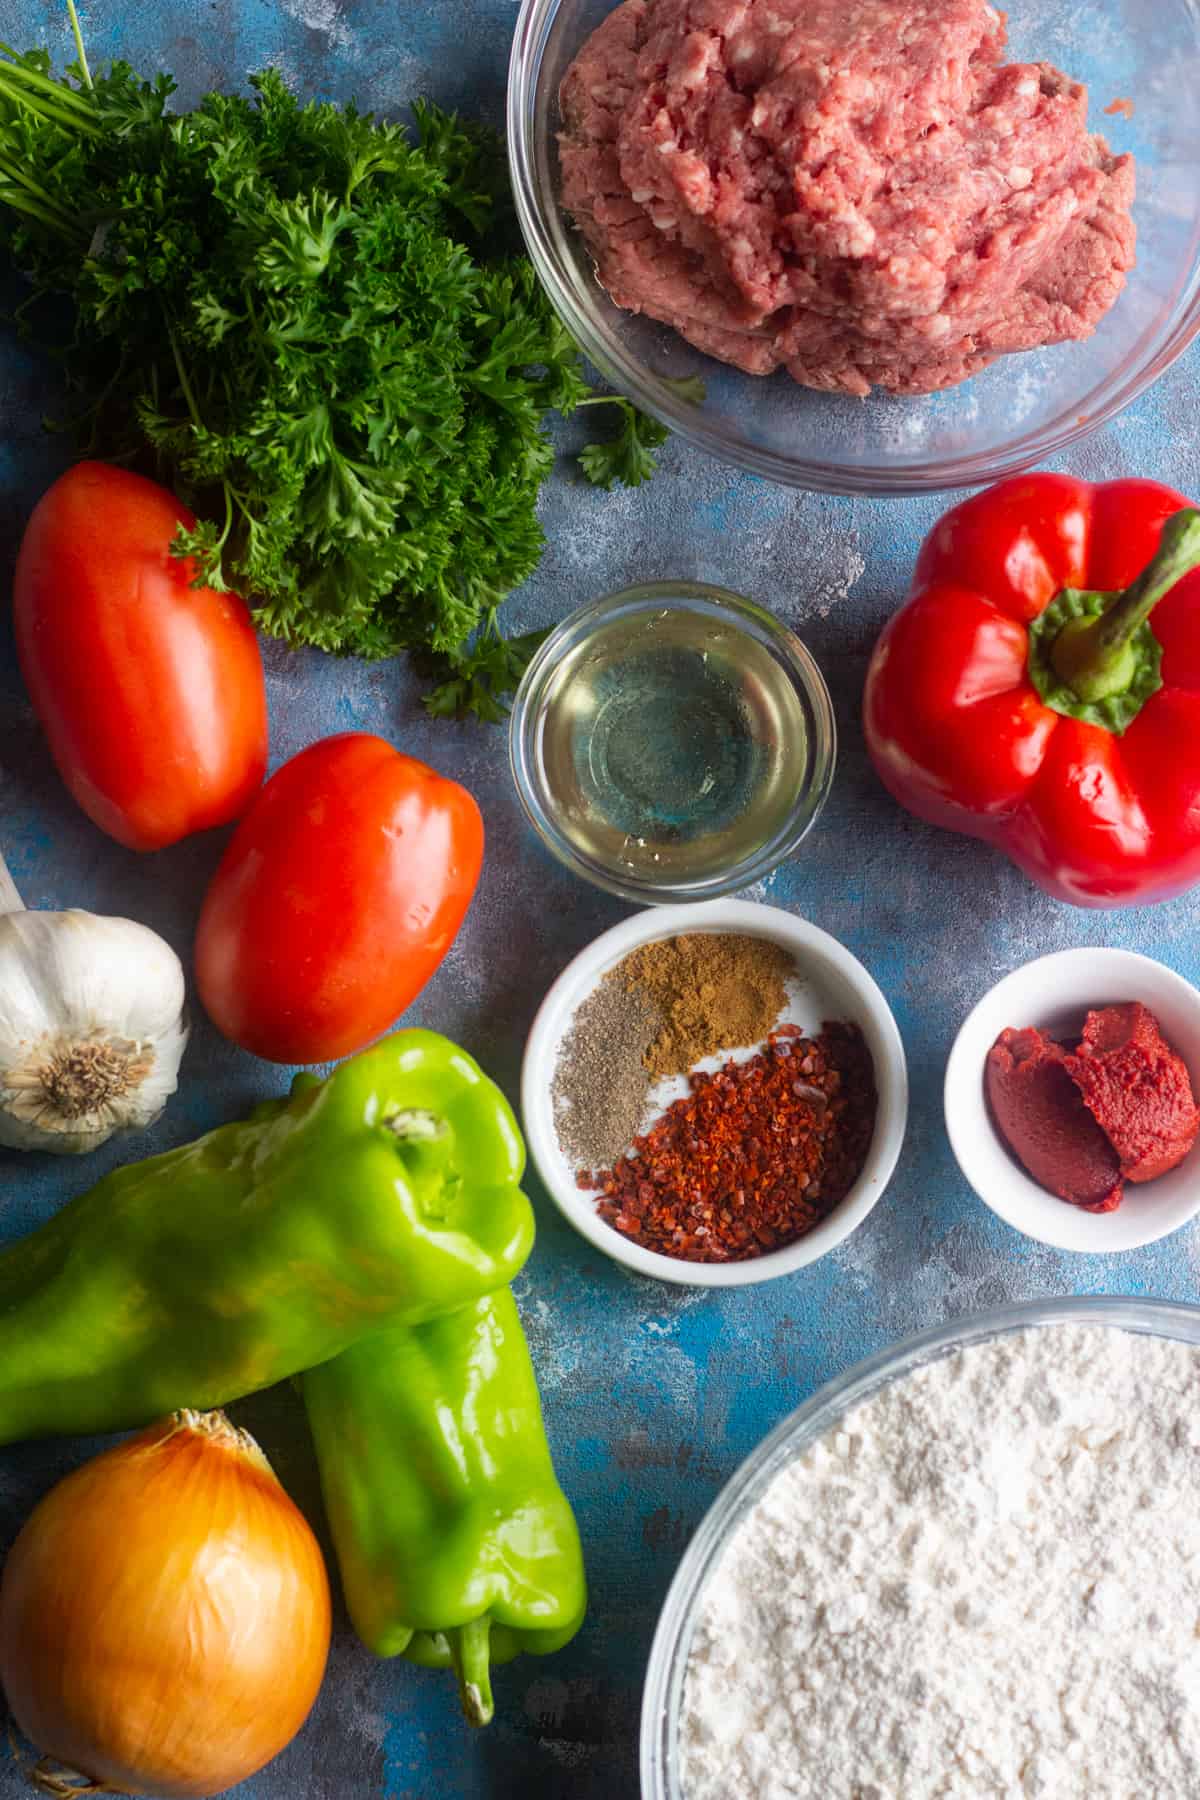 To make Lahmacun Turkish Pizza you need a dough and ground lamb or beef (or a combination of both), tomatoes, onions, garlic, parsley, red bell peppers and Italian green peppers. This mixture is seasoned with Aleppo pepper, tomato paste, black pepper and salt. 